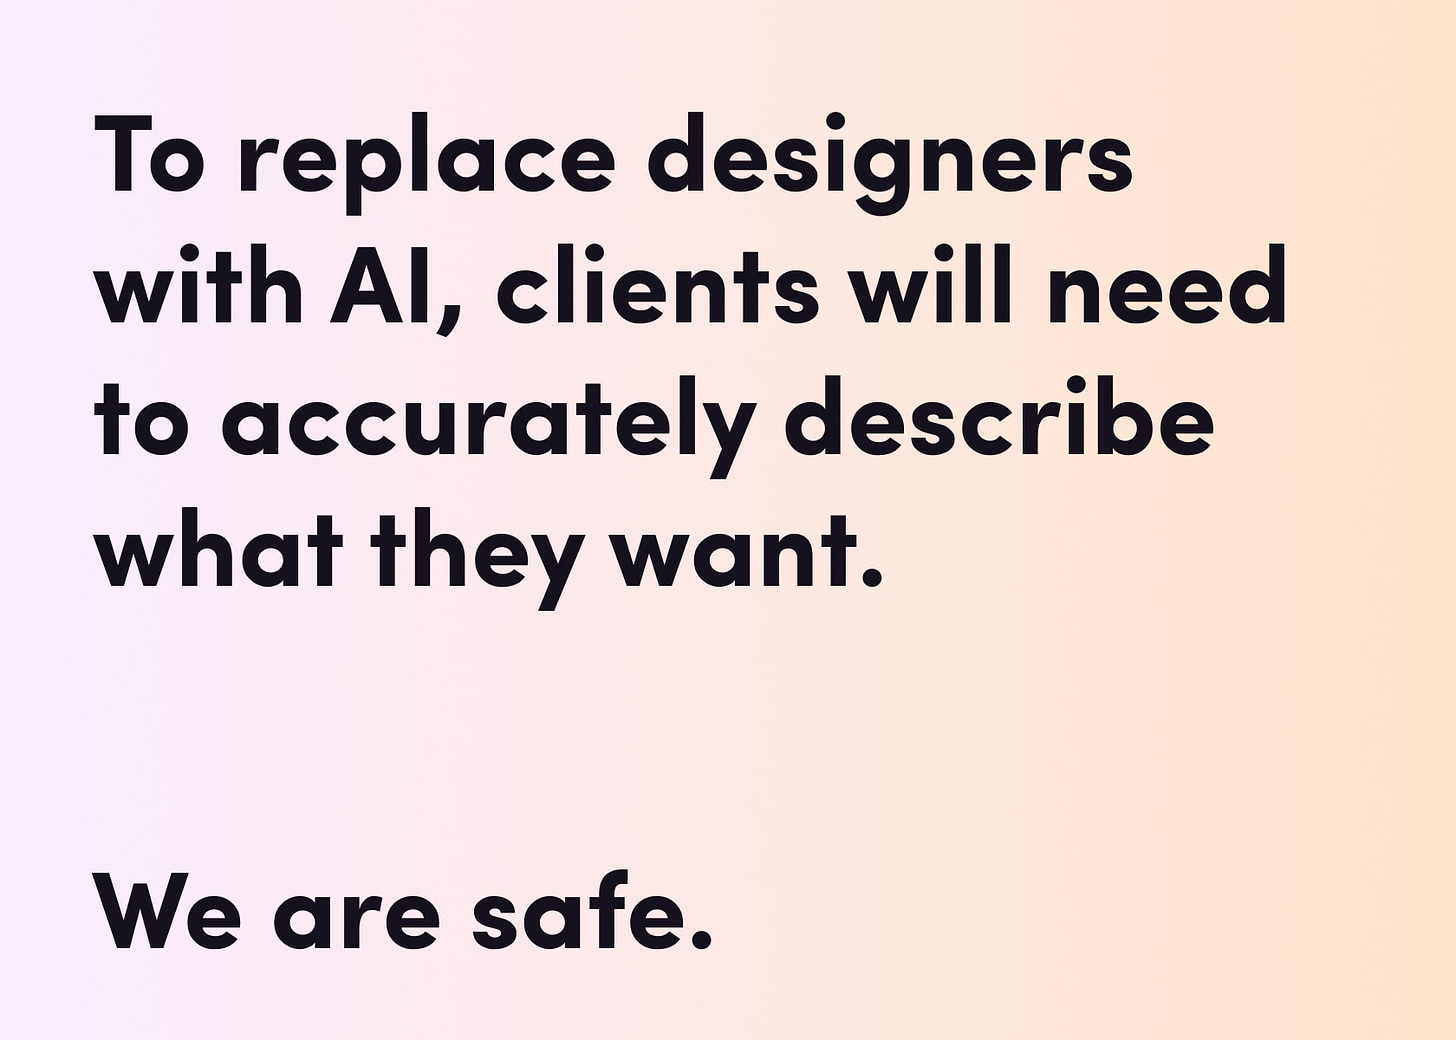 To replace designers with AI, clients will need to accurately describe what they want. We are safe.